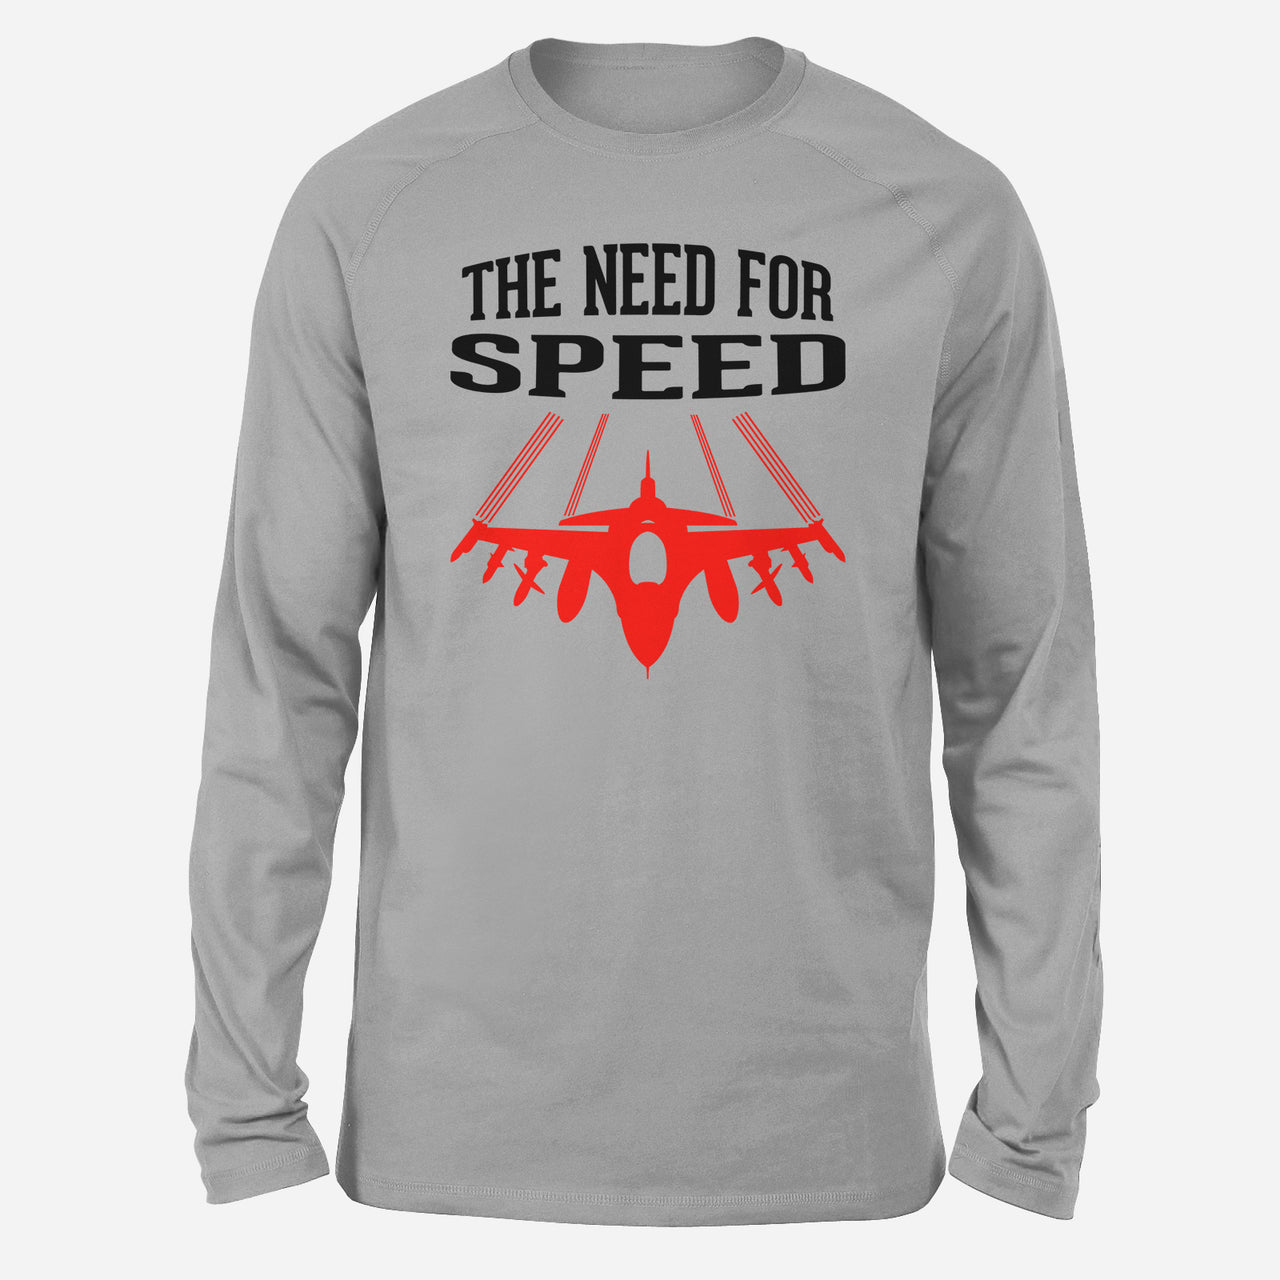 The Need For Speed Designed Long-Sleeve T-Shirts